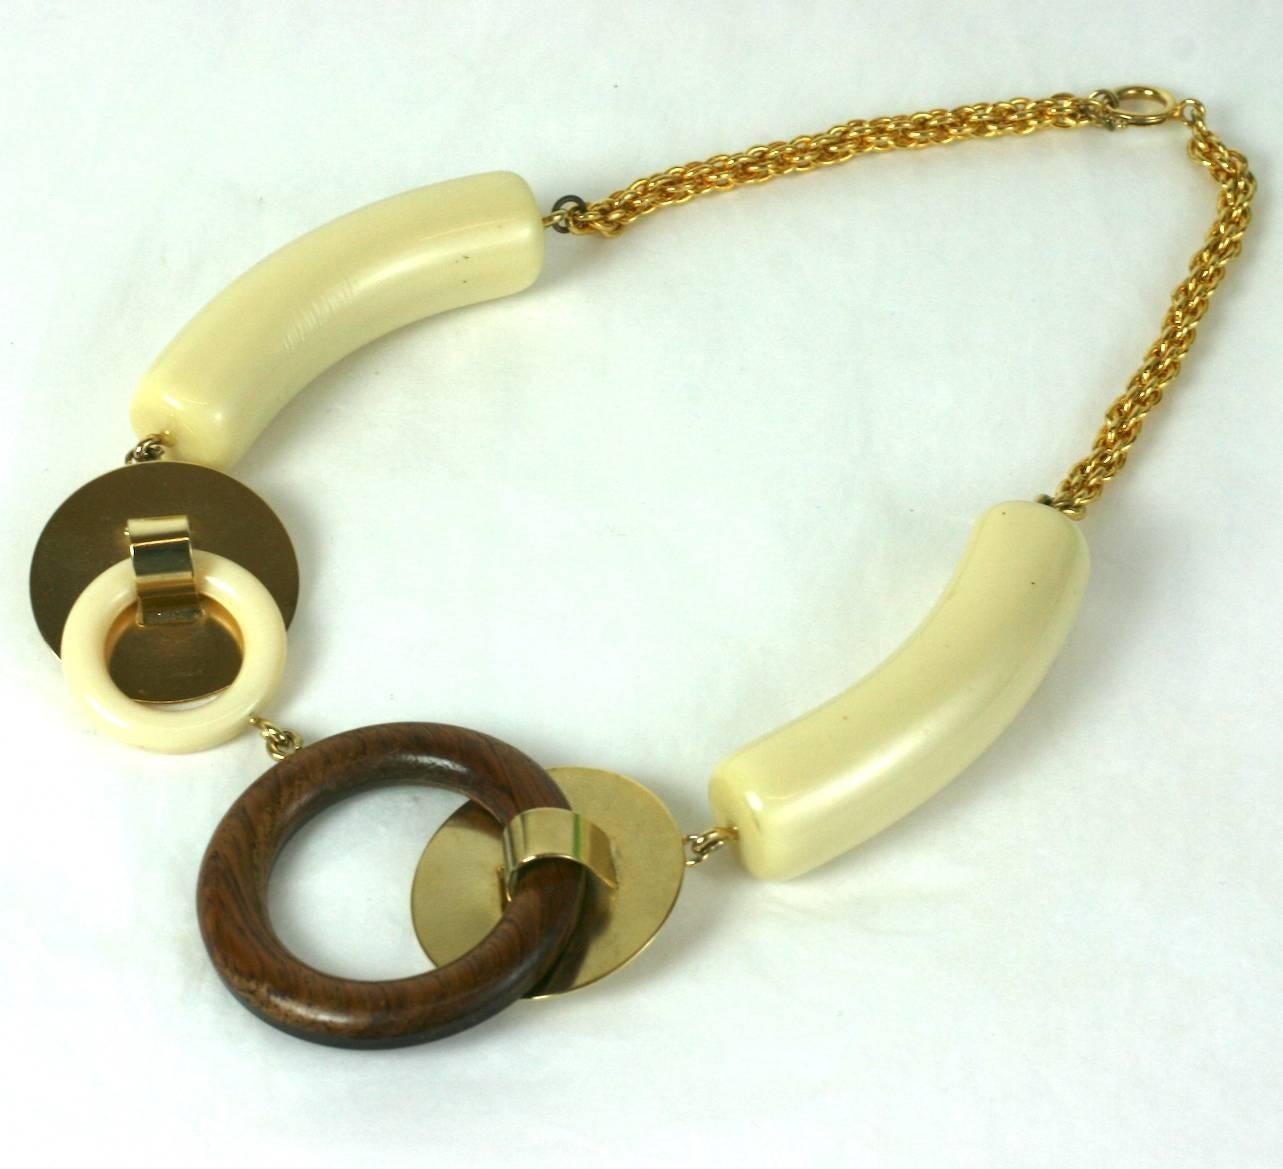 French modernist artistic vari link necklace composed of gilt discs, faux wood  and bakelite rings with large faux ivory bakelite toggle stations .
Marked France. Excellent Condition.
Length 18.50